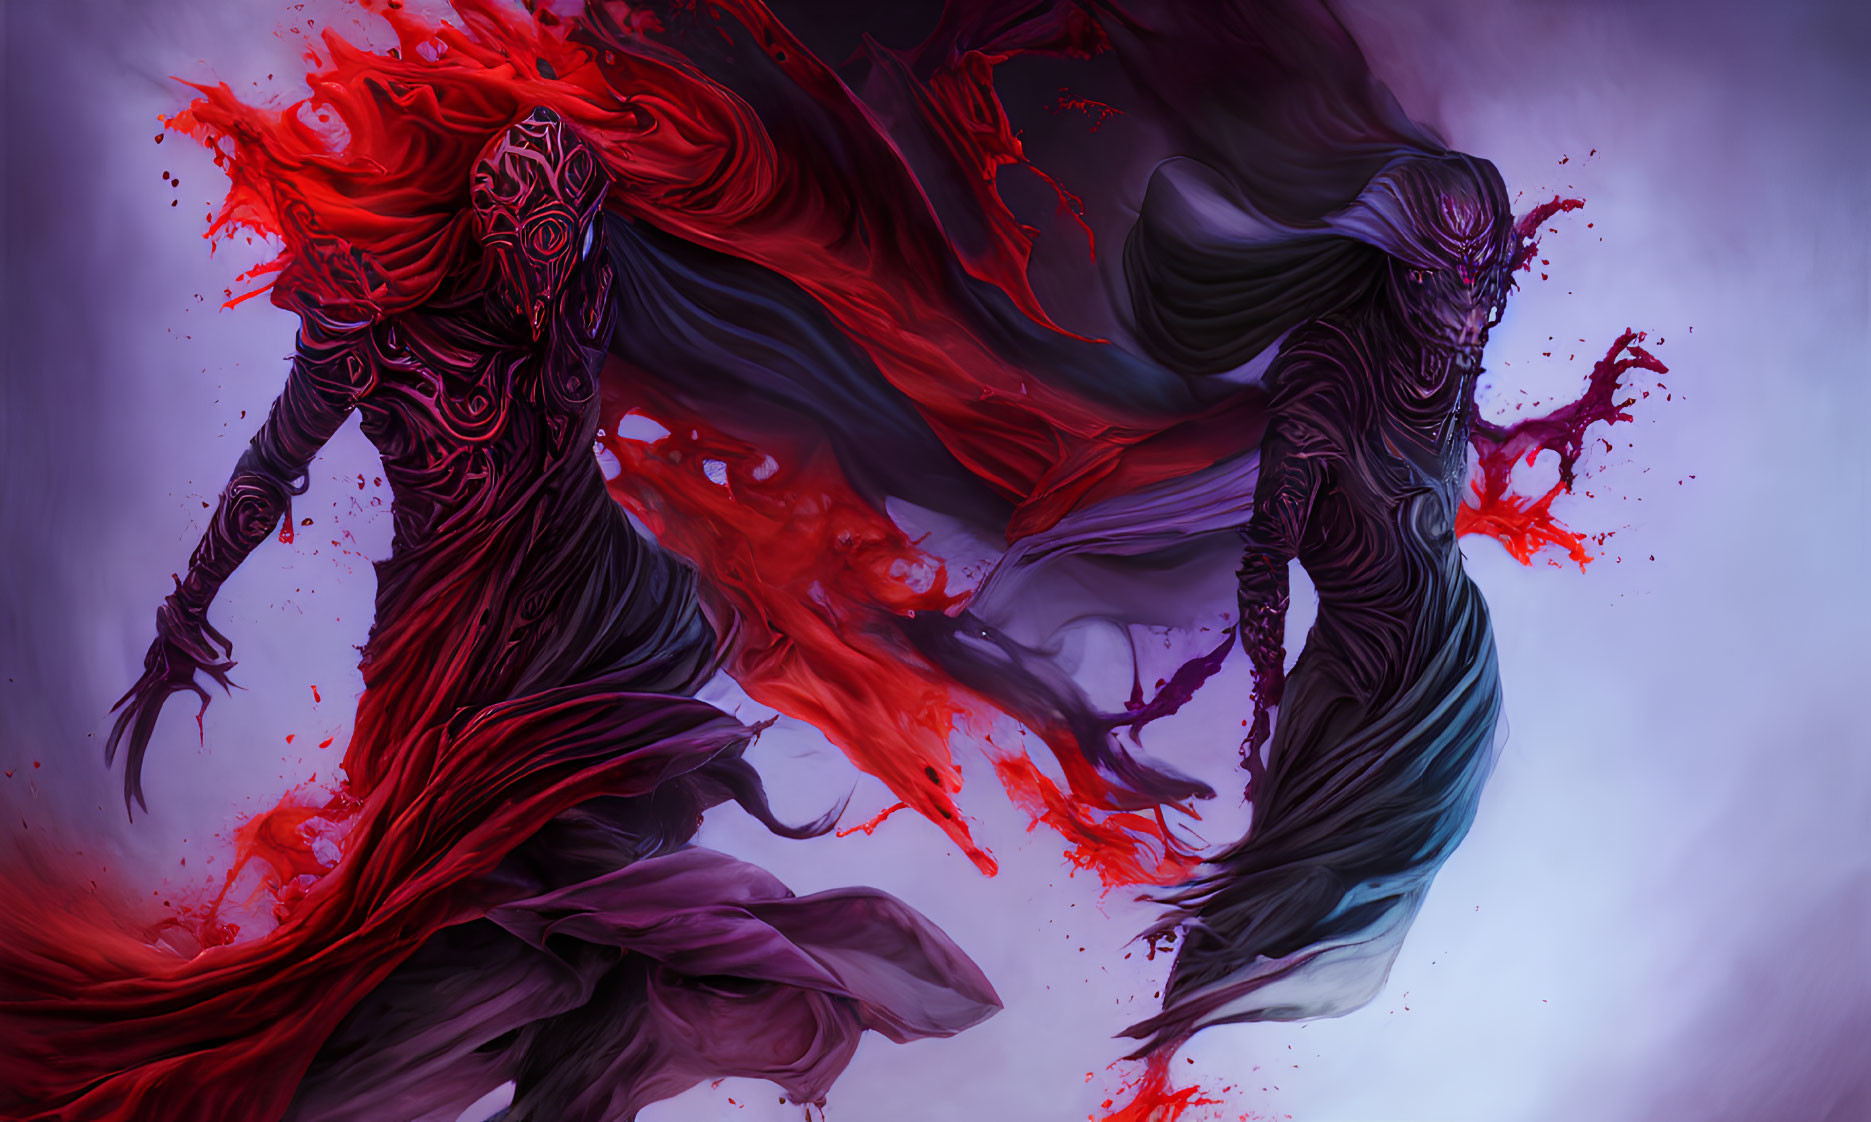 Ethereal figures in dark garments with vivid red splashes